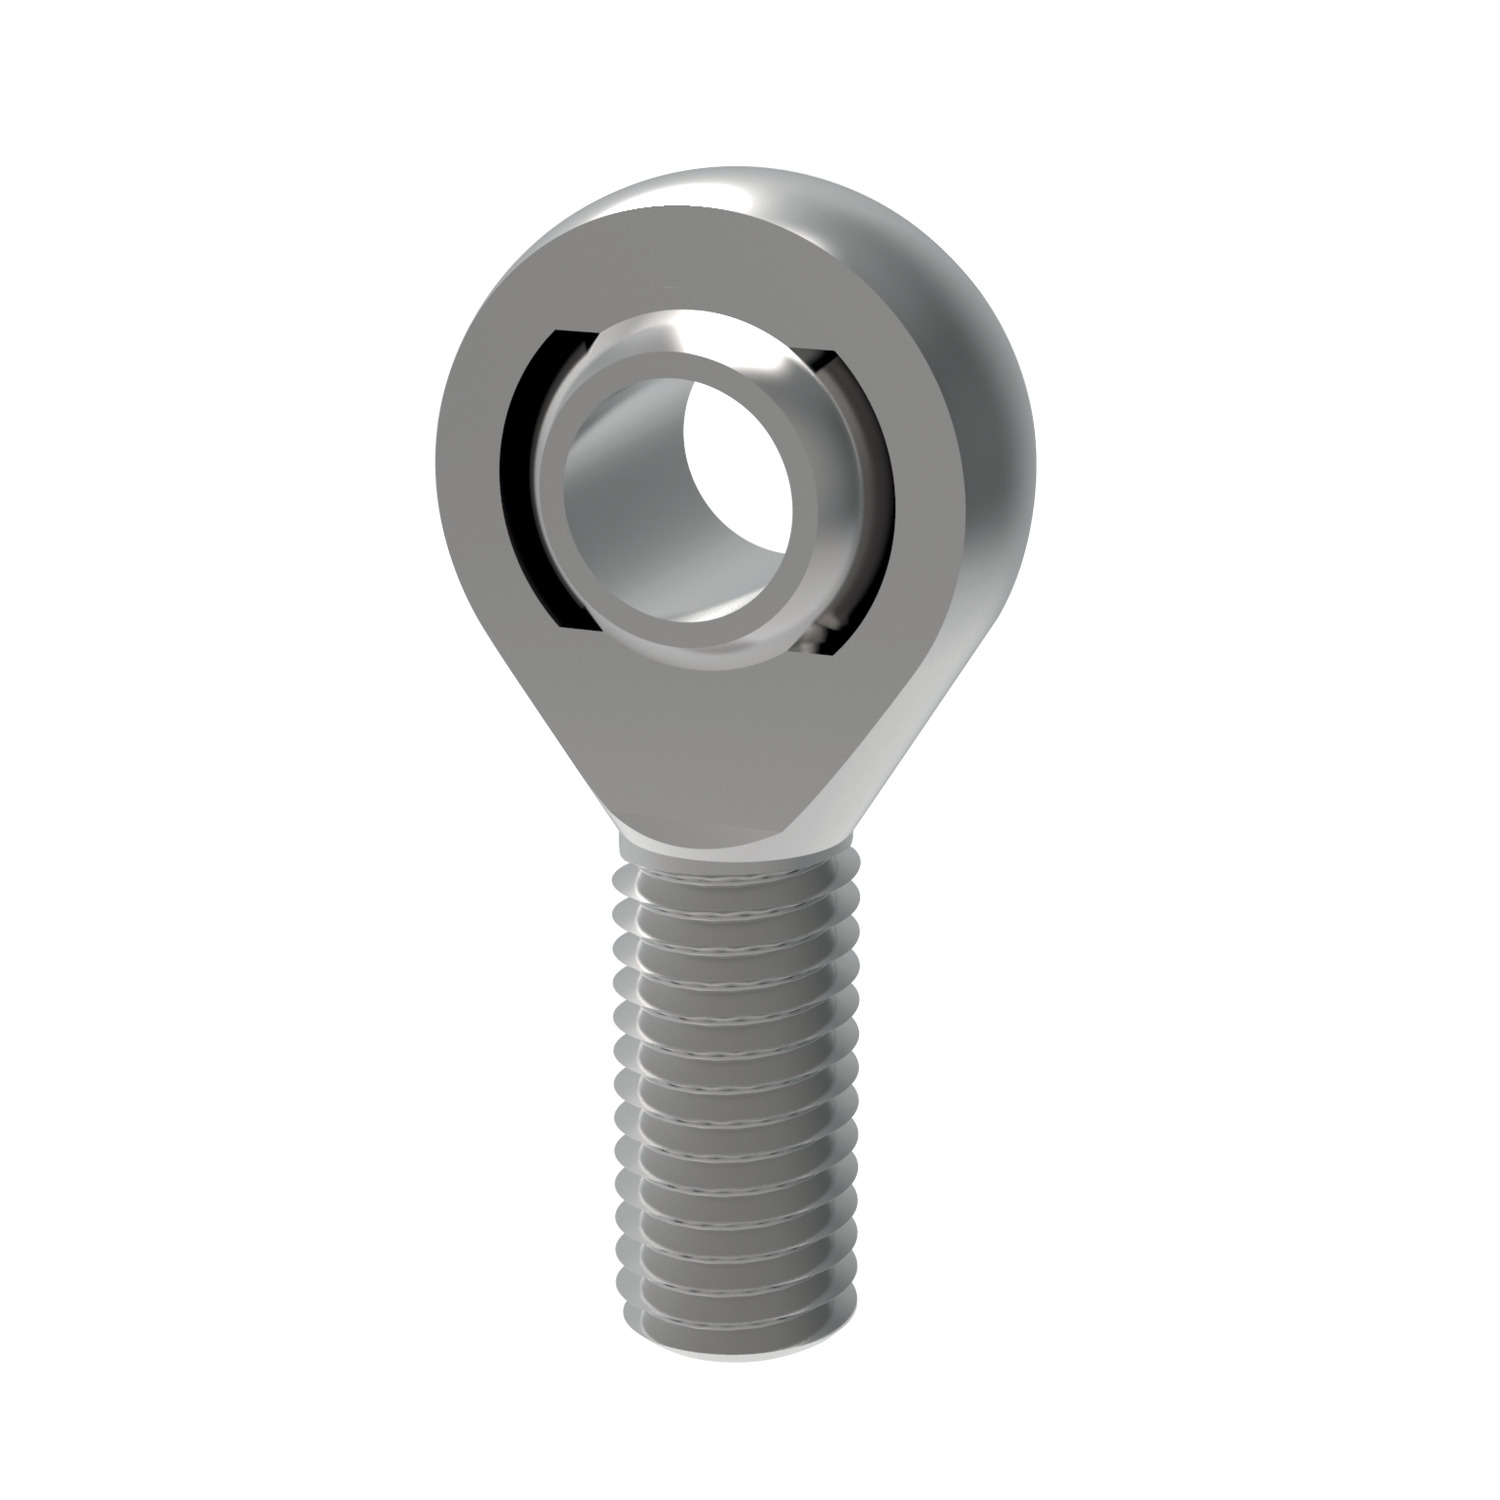 Heavy-Duty Rod Ends - Male Heavy duty rod end (male) with plain bearing. Maintenance-free K series, ideal for vibrating or shock load applications.